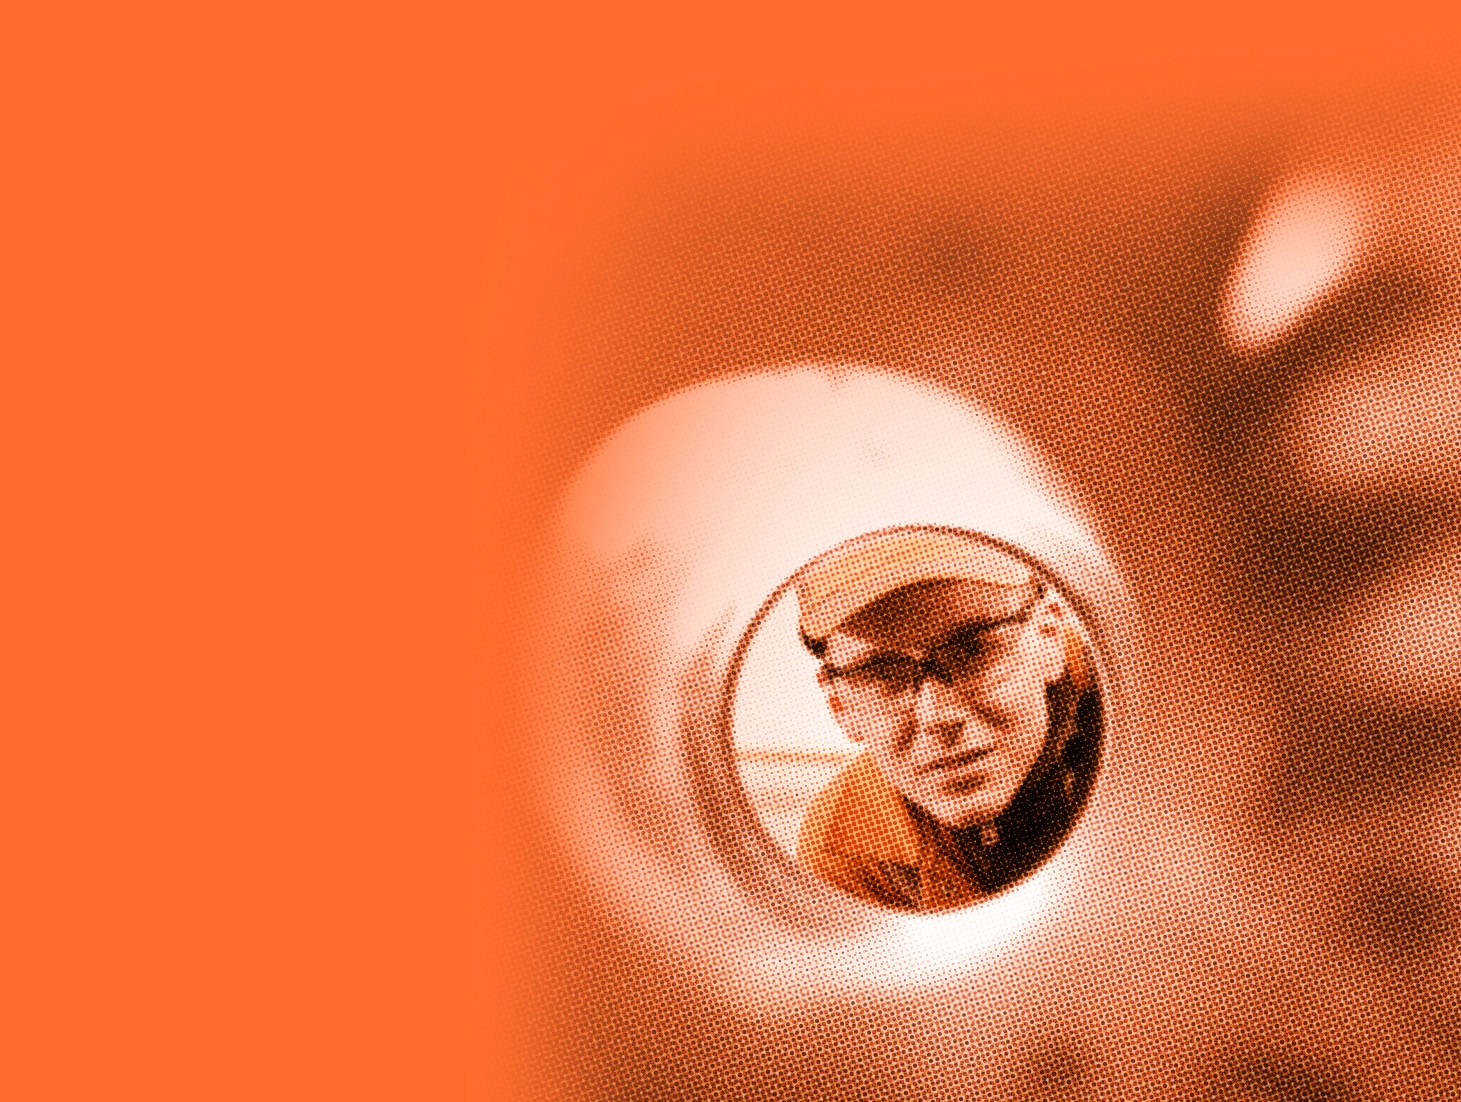 Man with safety glasses looks at camera through large tube